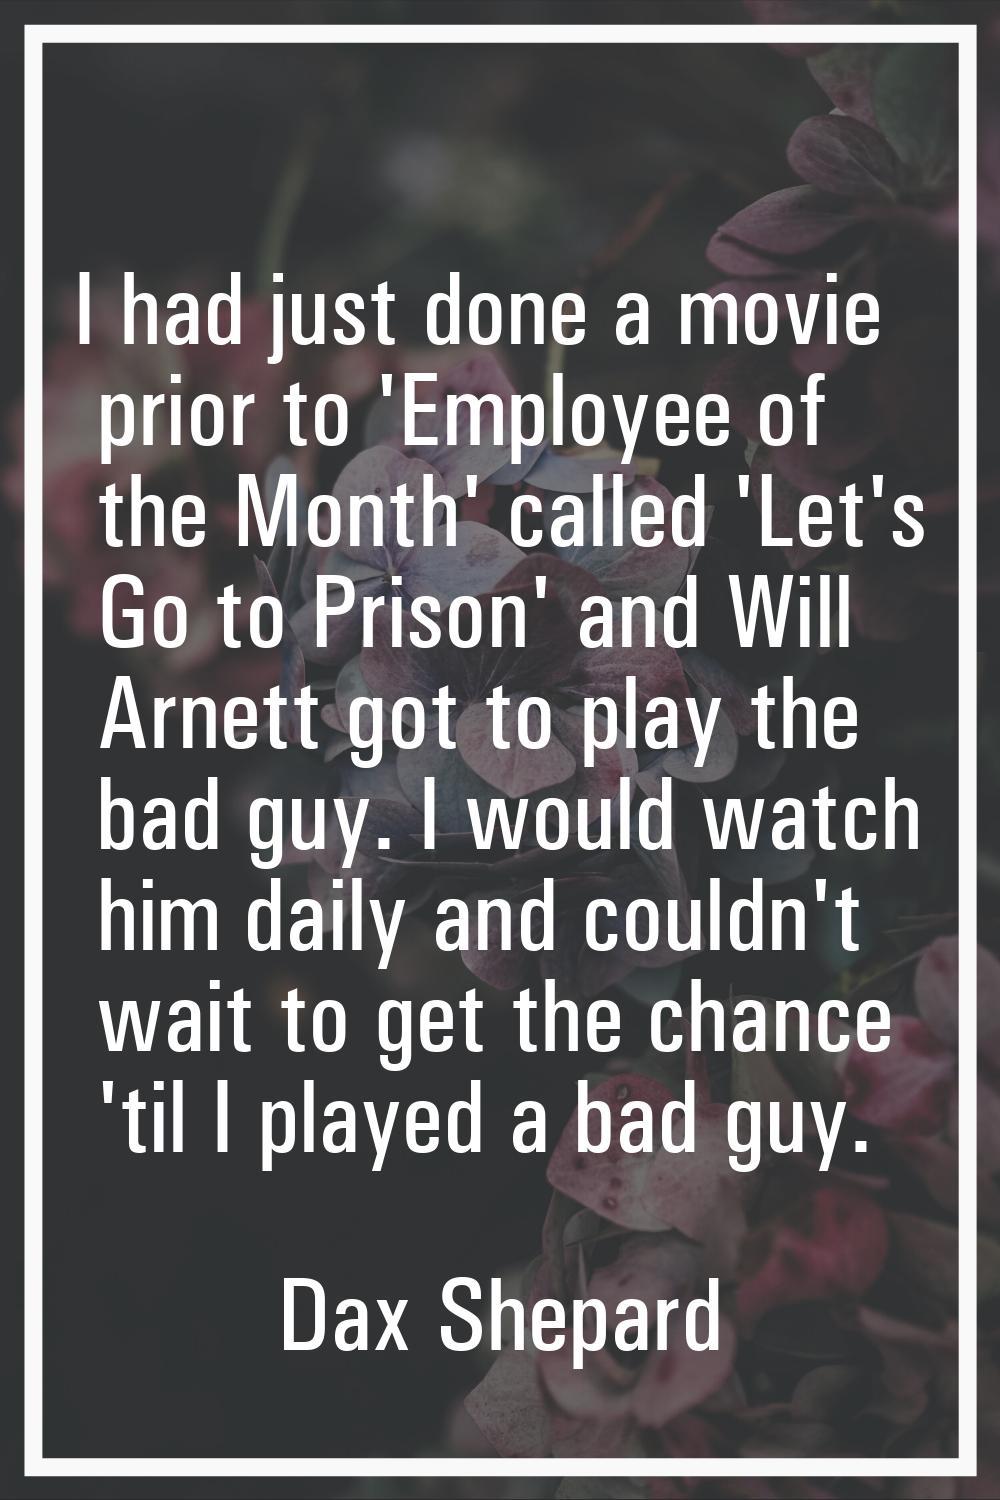 I had just done a movie prior to 'Employee of the Month' called 'Let's Go to Prison' and Will Arnet